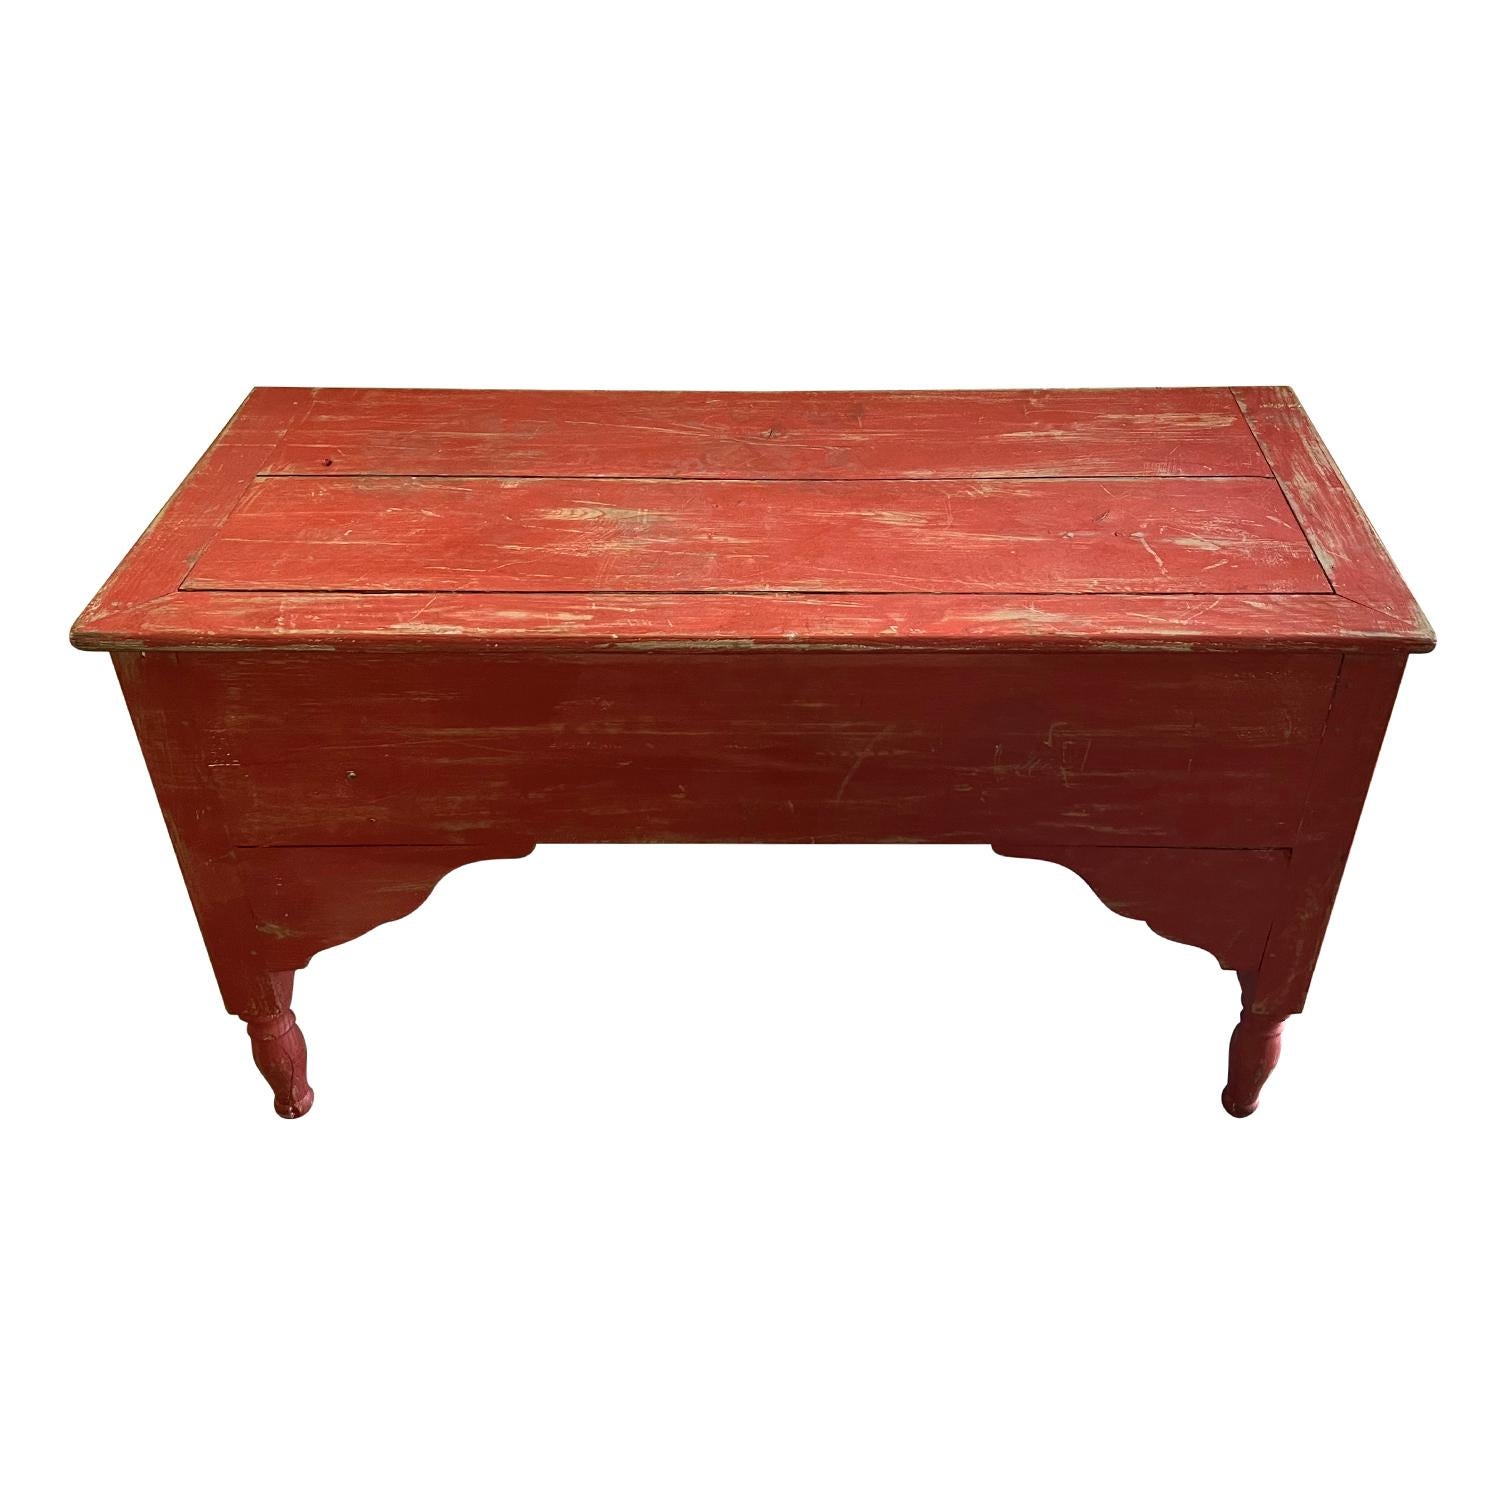 Early 19th century, a rare Cassetone table from Provence with charming lateral brackets and hand turned legs in vivid red patina, in good condition. This antique French Provincial console table has a simple and rustic style. It was used as a